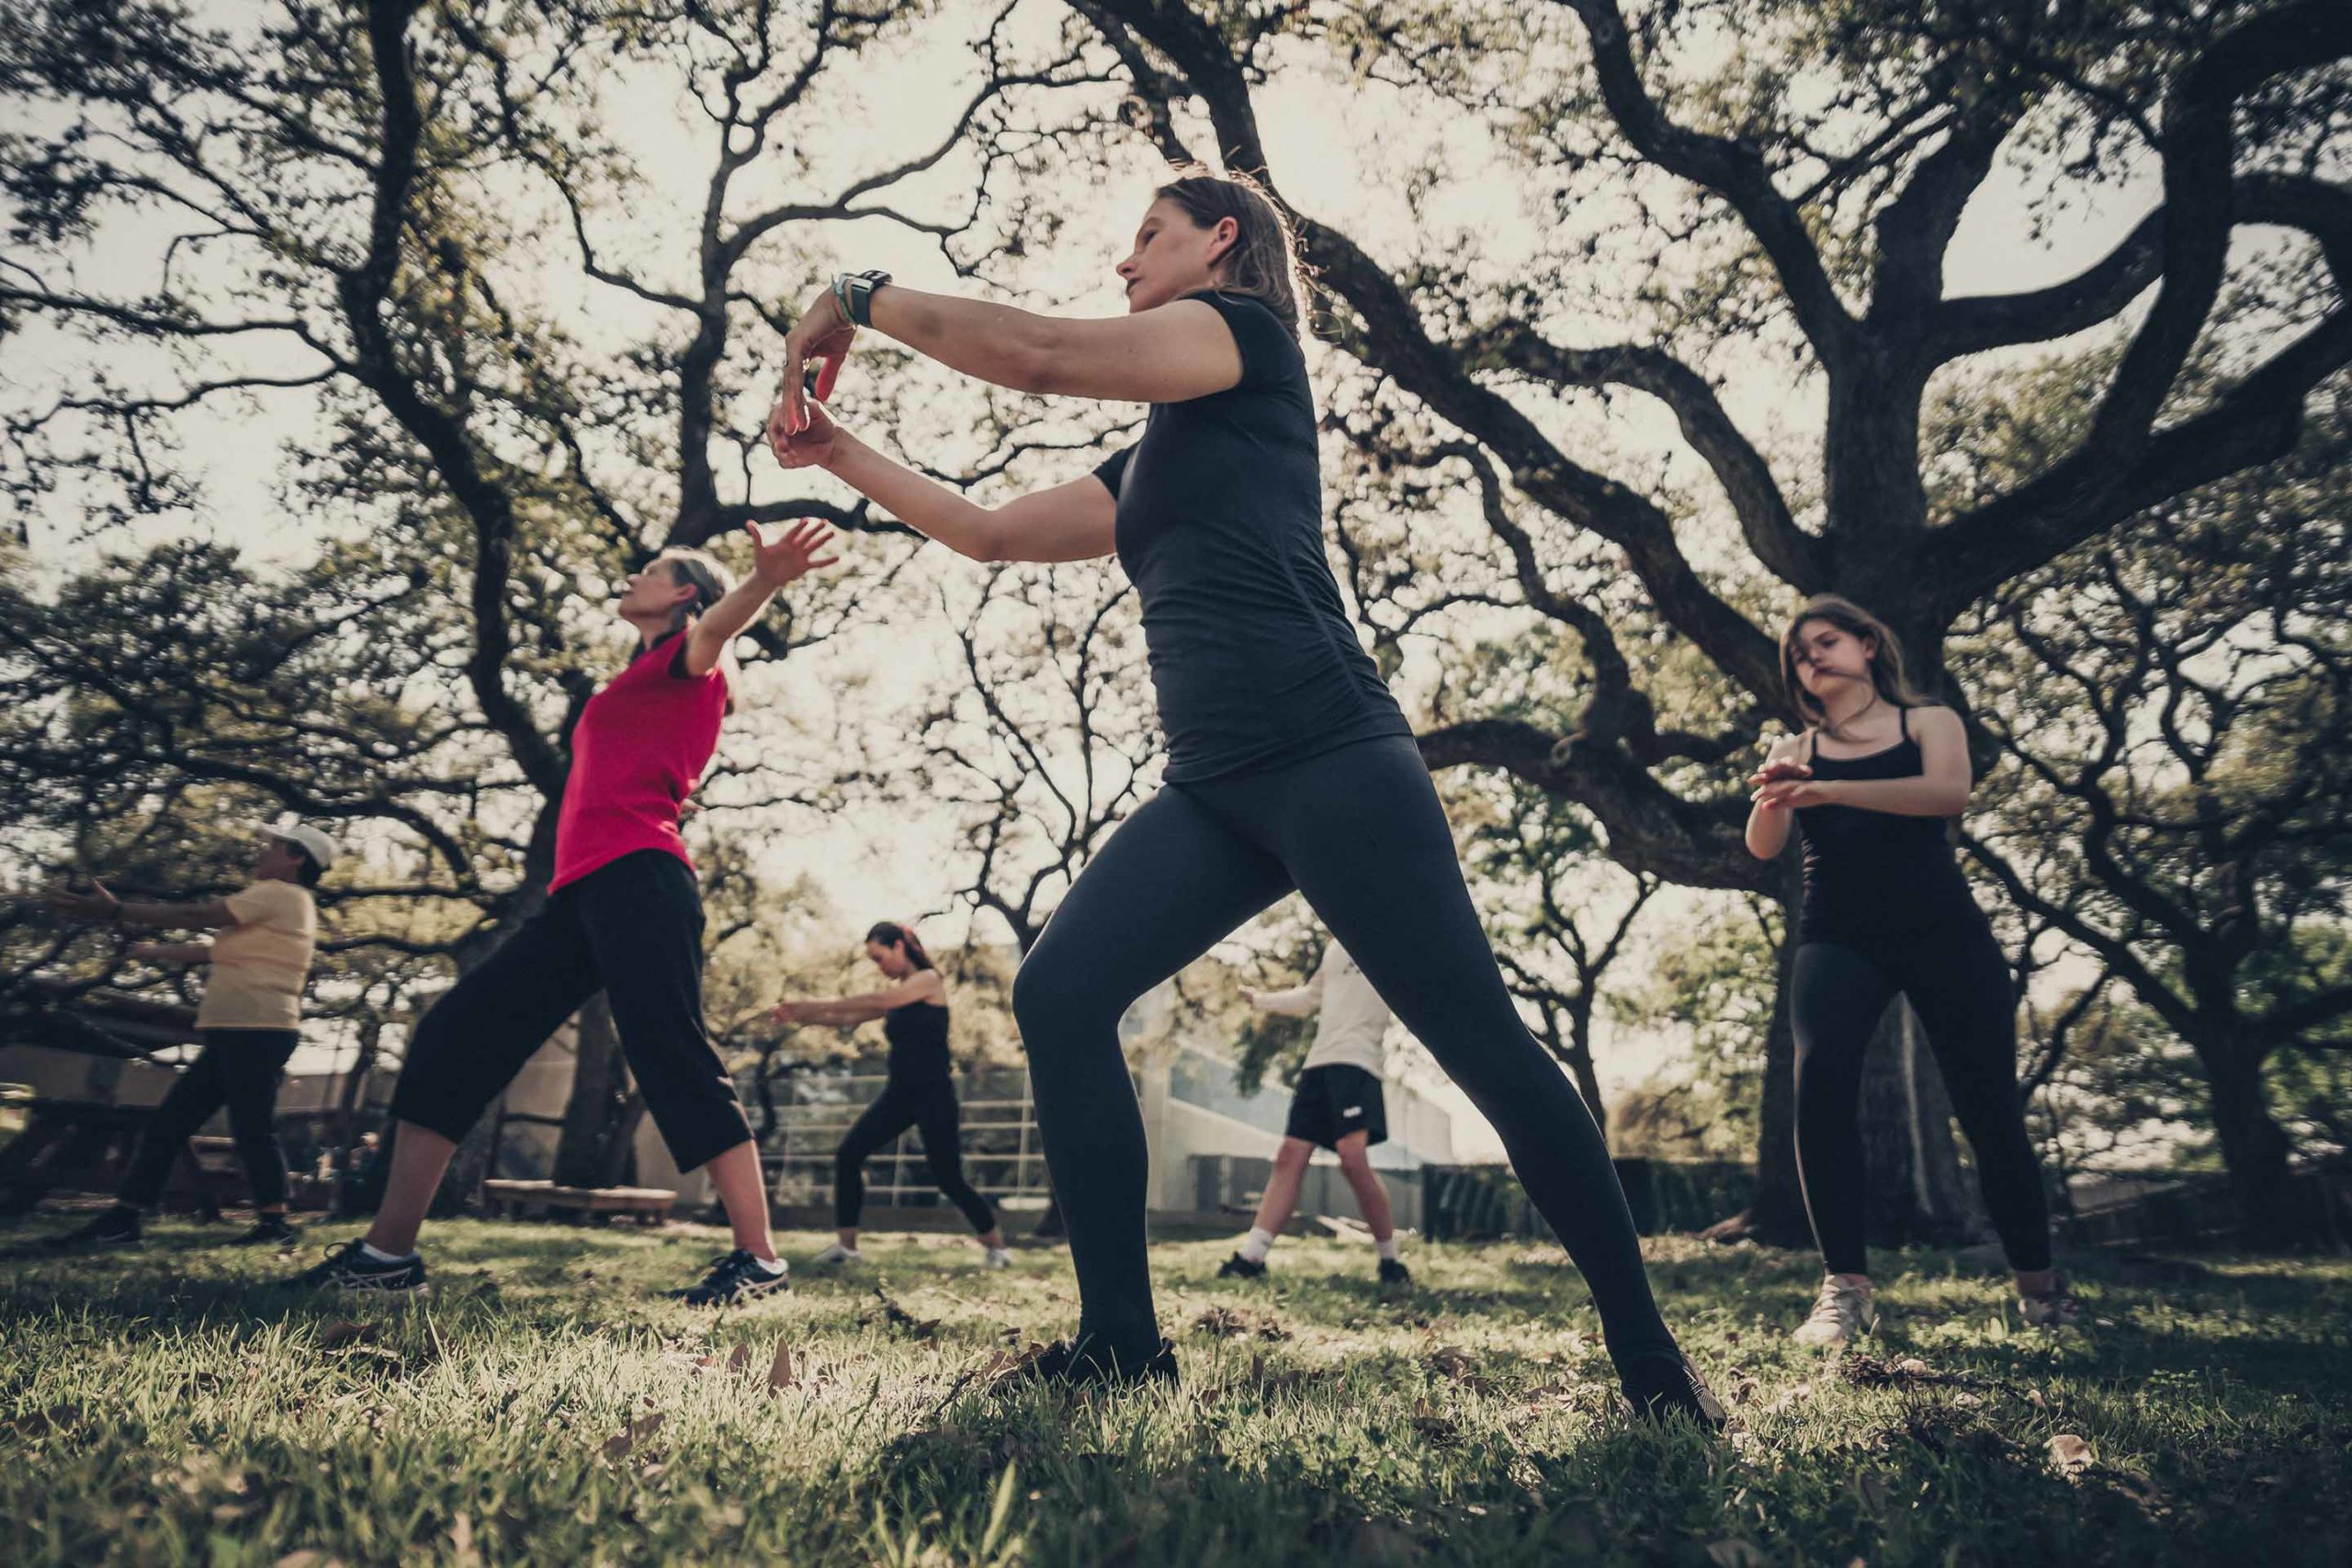 Woman member in black standing outside under tree canopy transitions into a Tai Chi pose peacefully. She is surrounded by other female members of various ages.